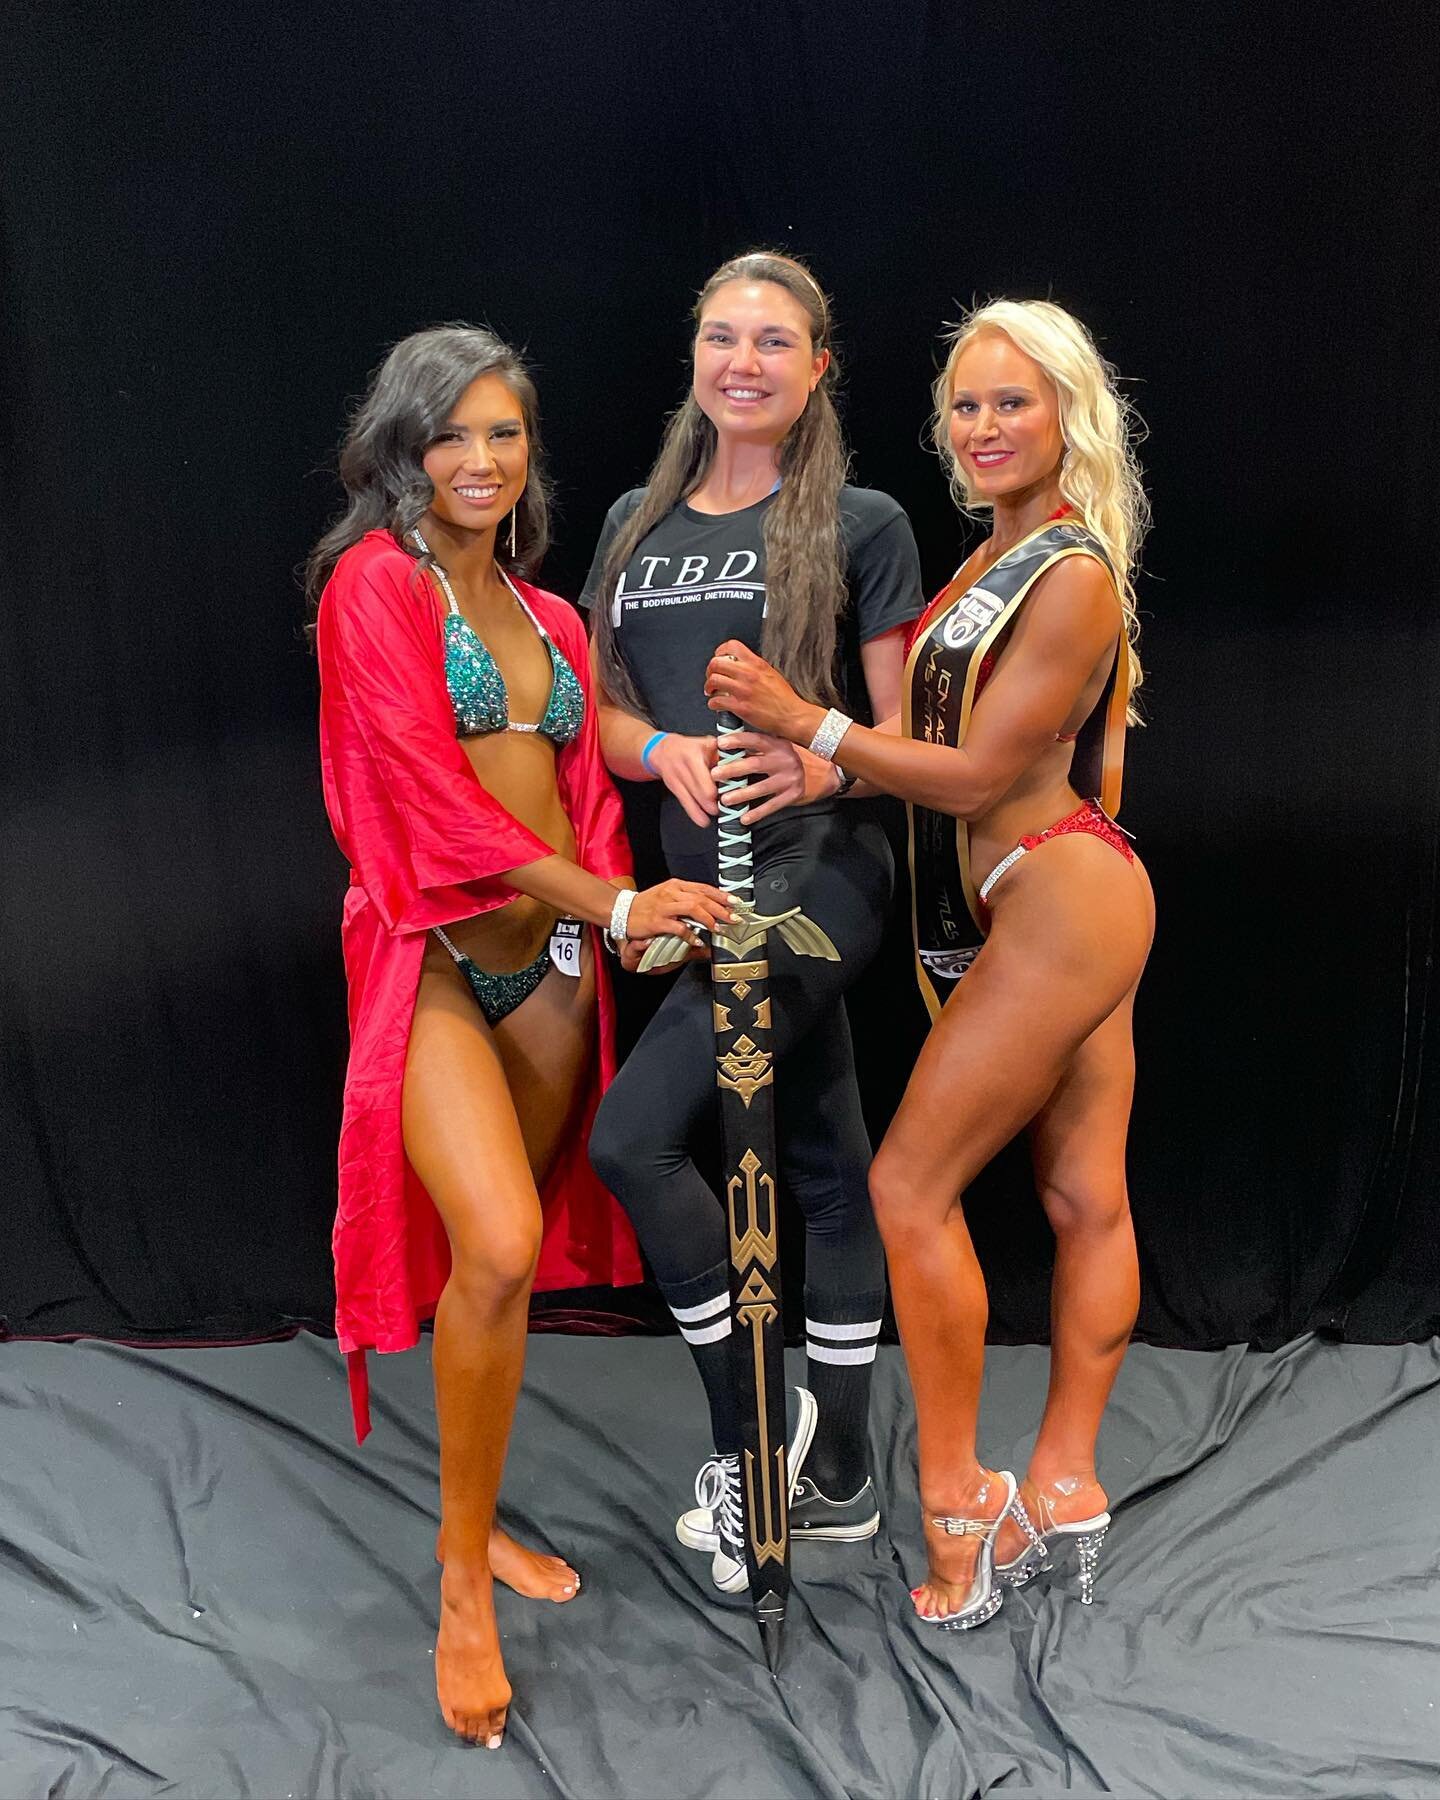 What a great day at the @icn_act titles for our TEAM TBD girls @ashleabaxter and @canditopia 🎉👙👟

After years of teamwork and 6+ months of comp prep I felt so unbelievably proud to watch them from the crowd yesterday and to be able call myself the